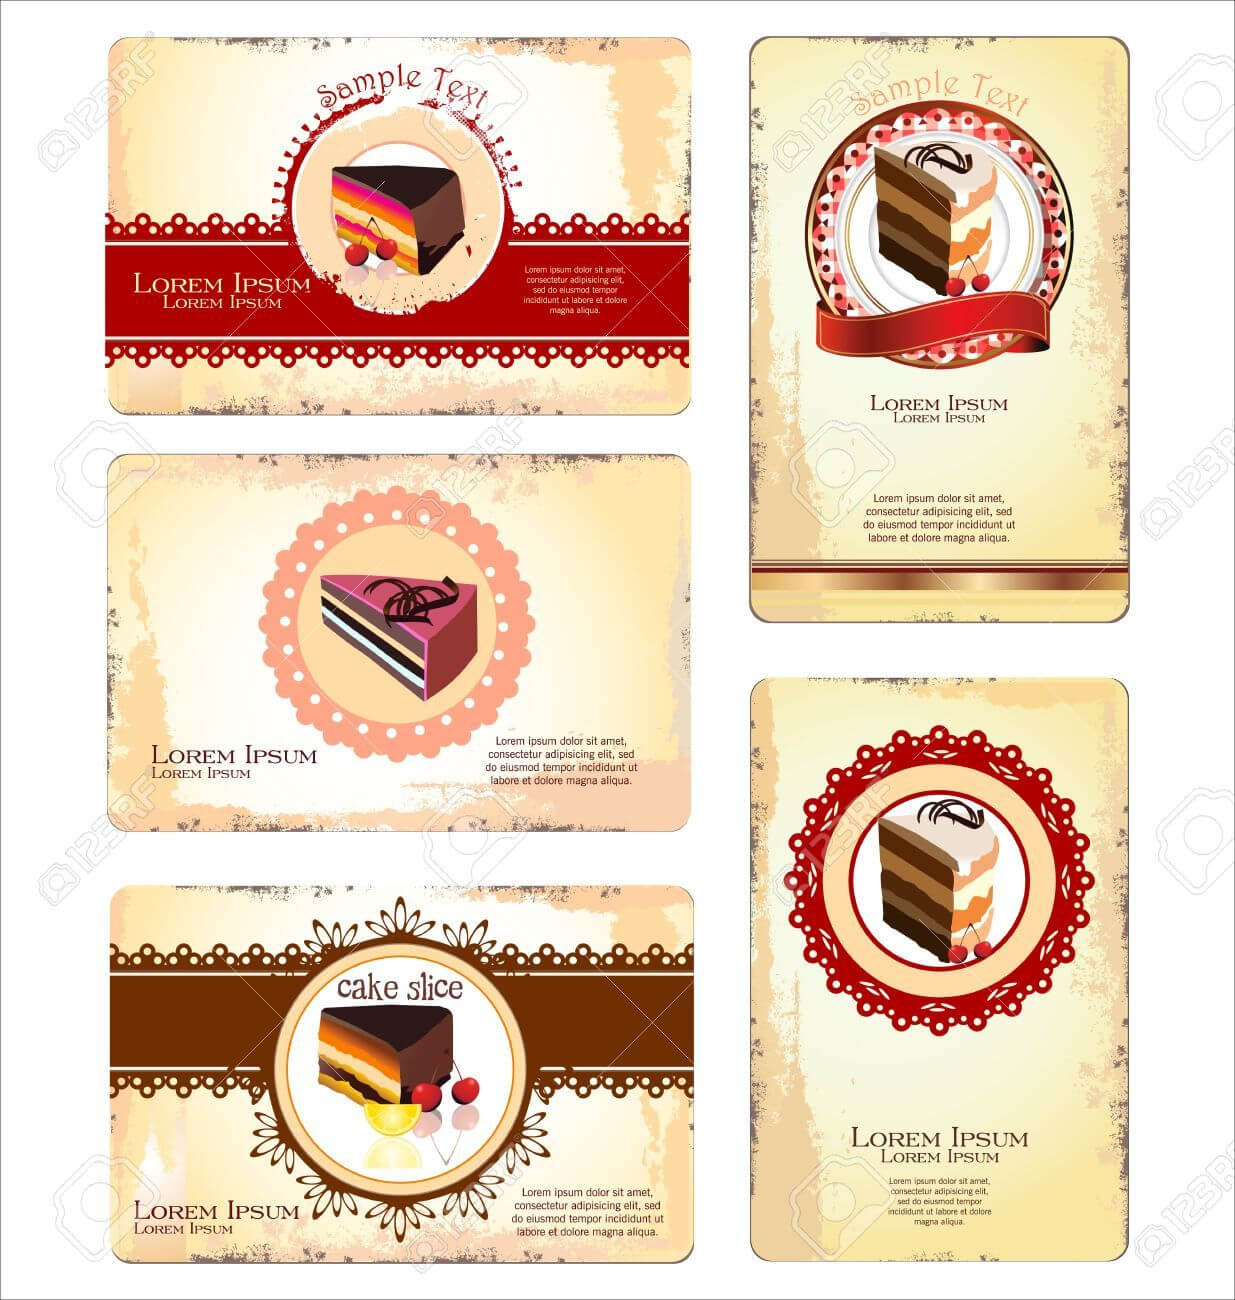 Coffeetea And Cakes Menu Or Business Card Template Royalty For Cake Business Cards Templates Free